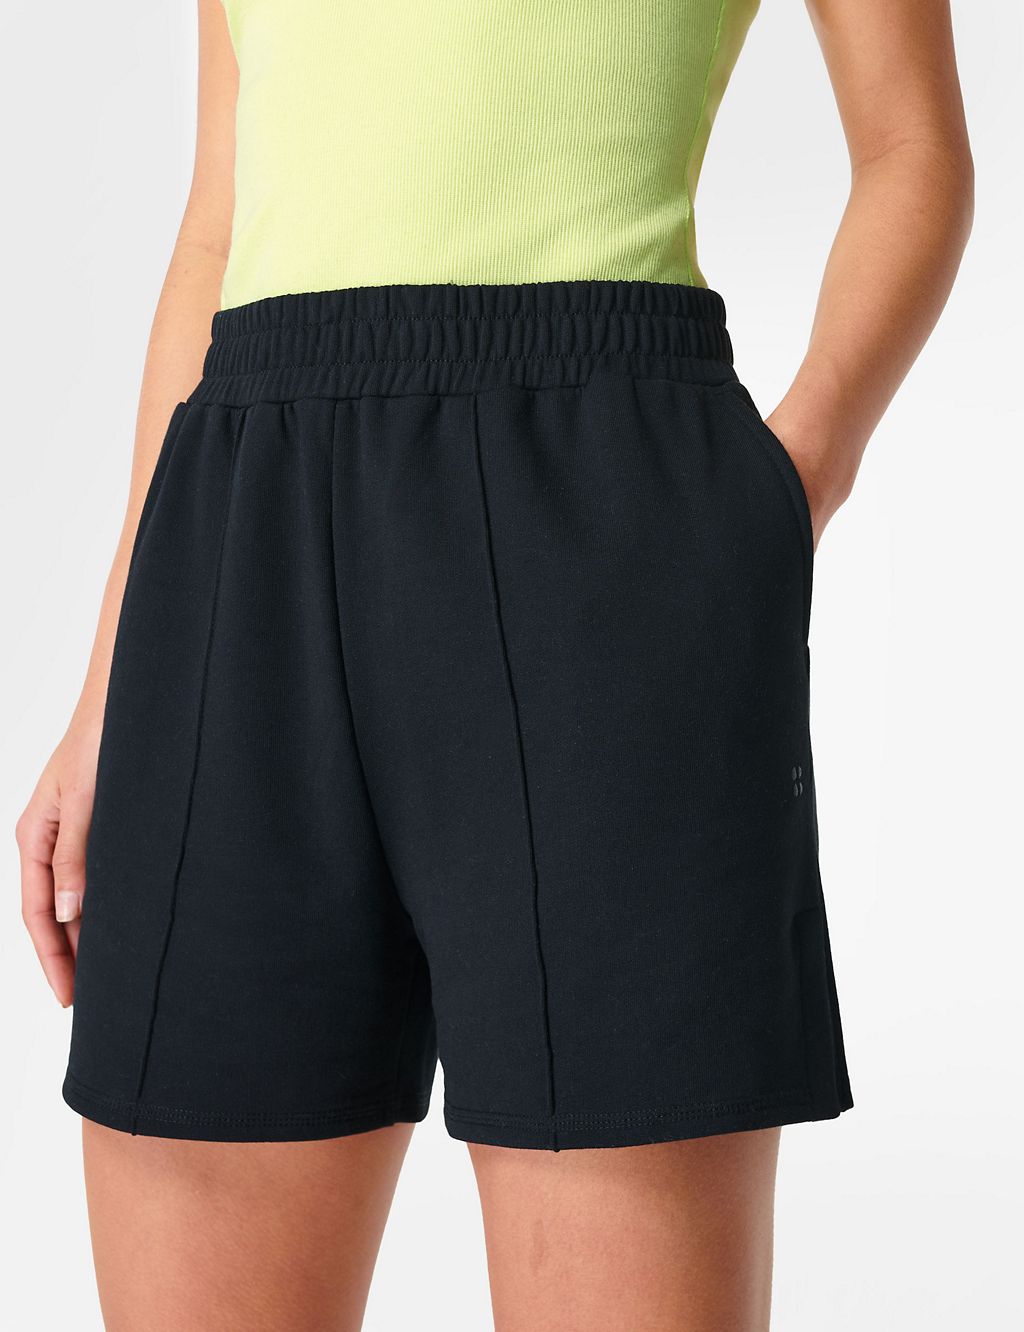 After Class Cotton Modal High Waisted Shorts 3 of 6